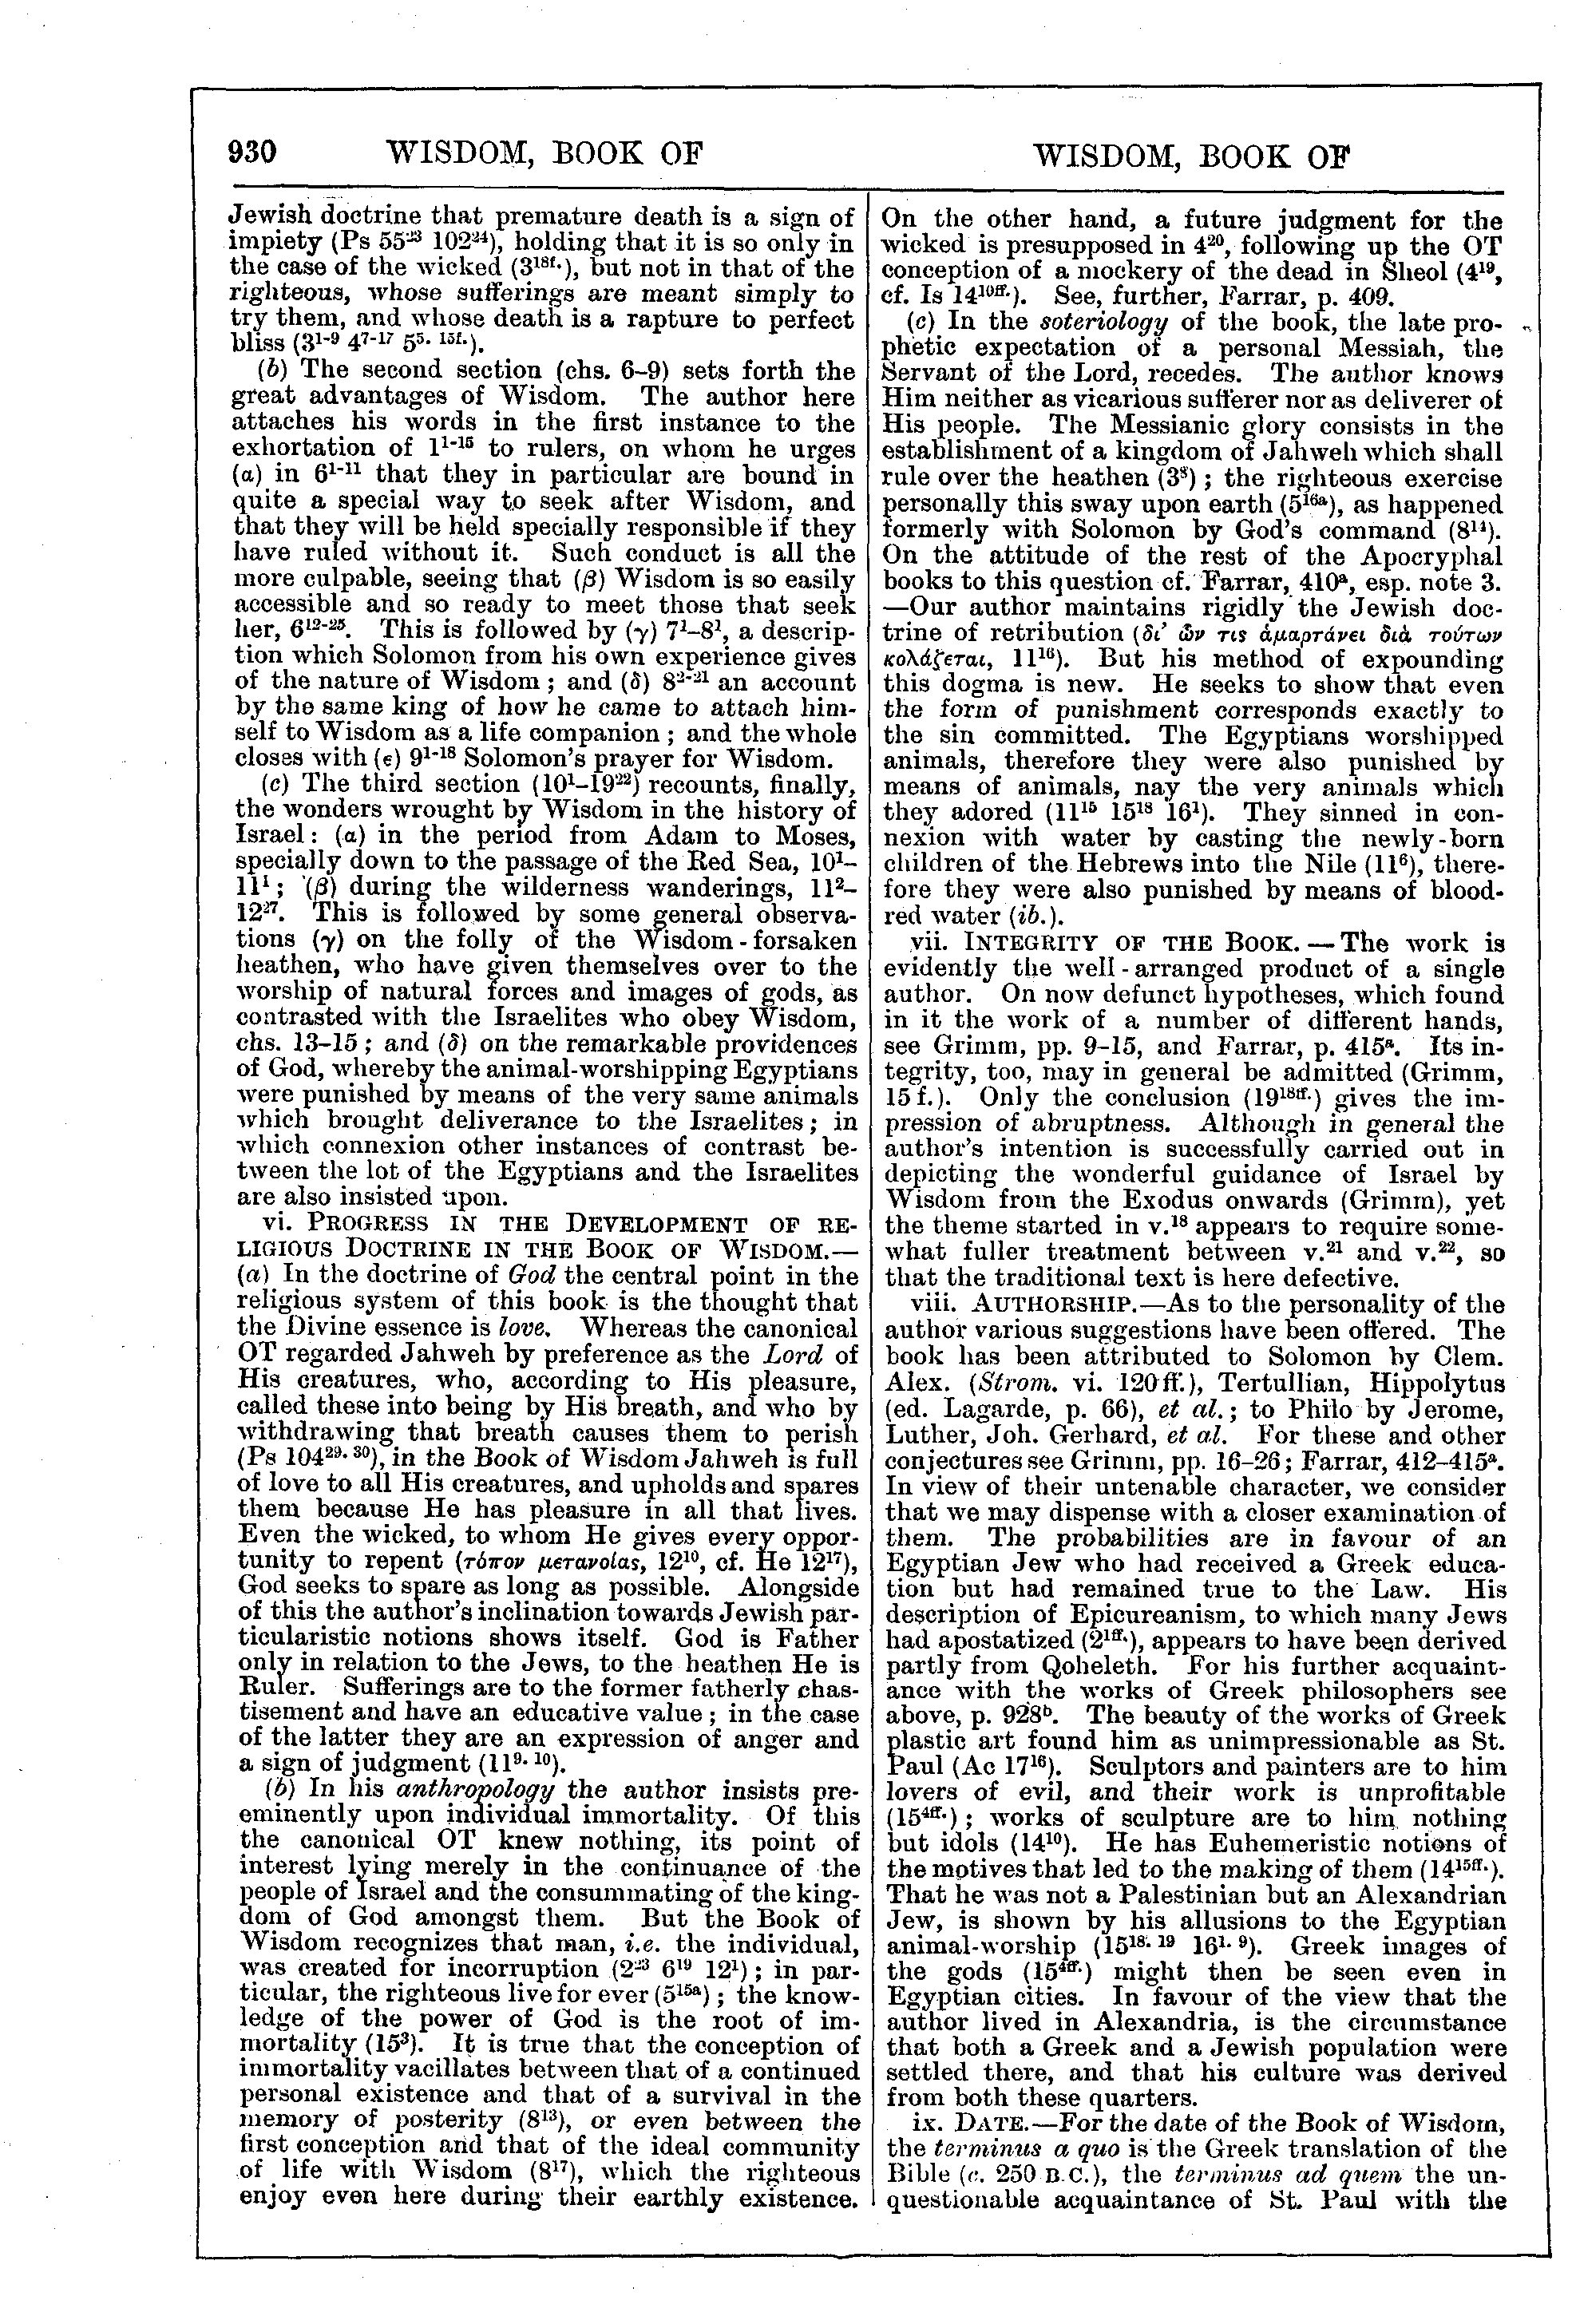 Image of page 930